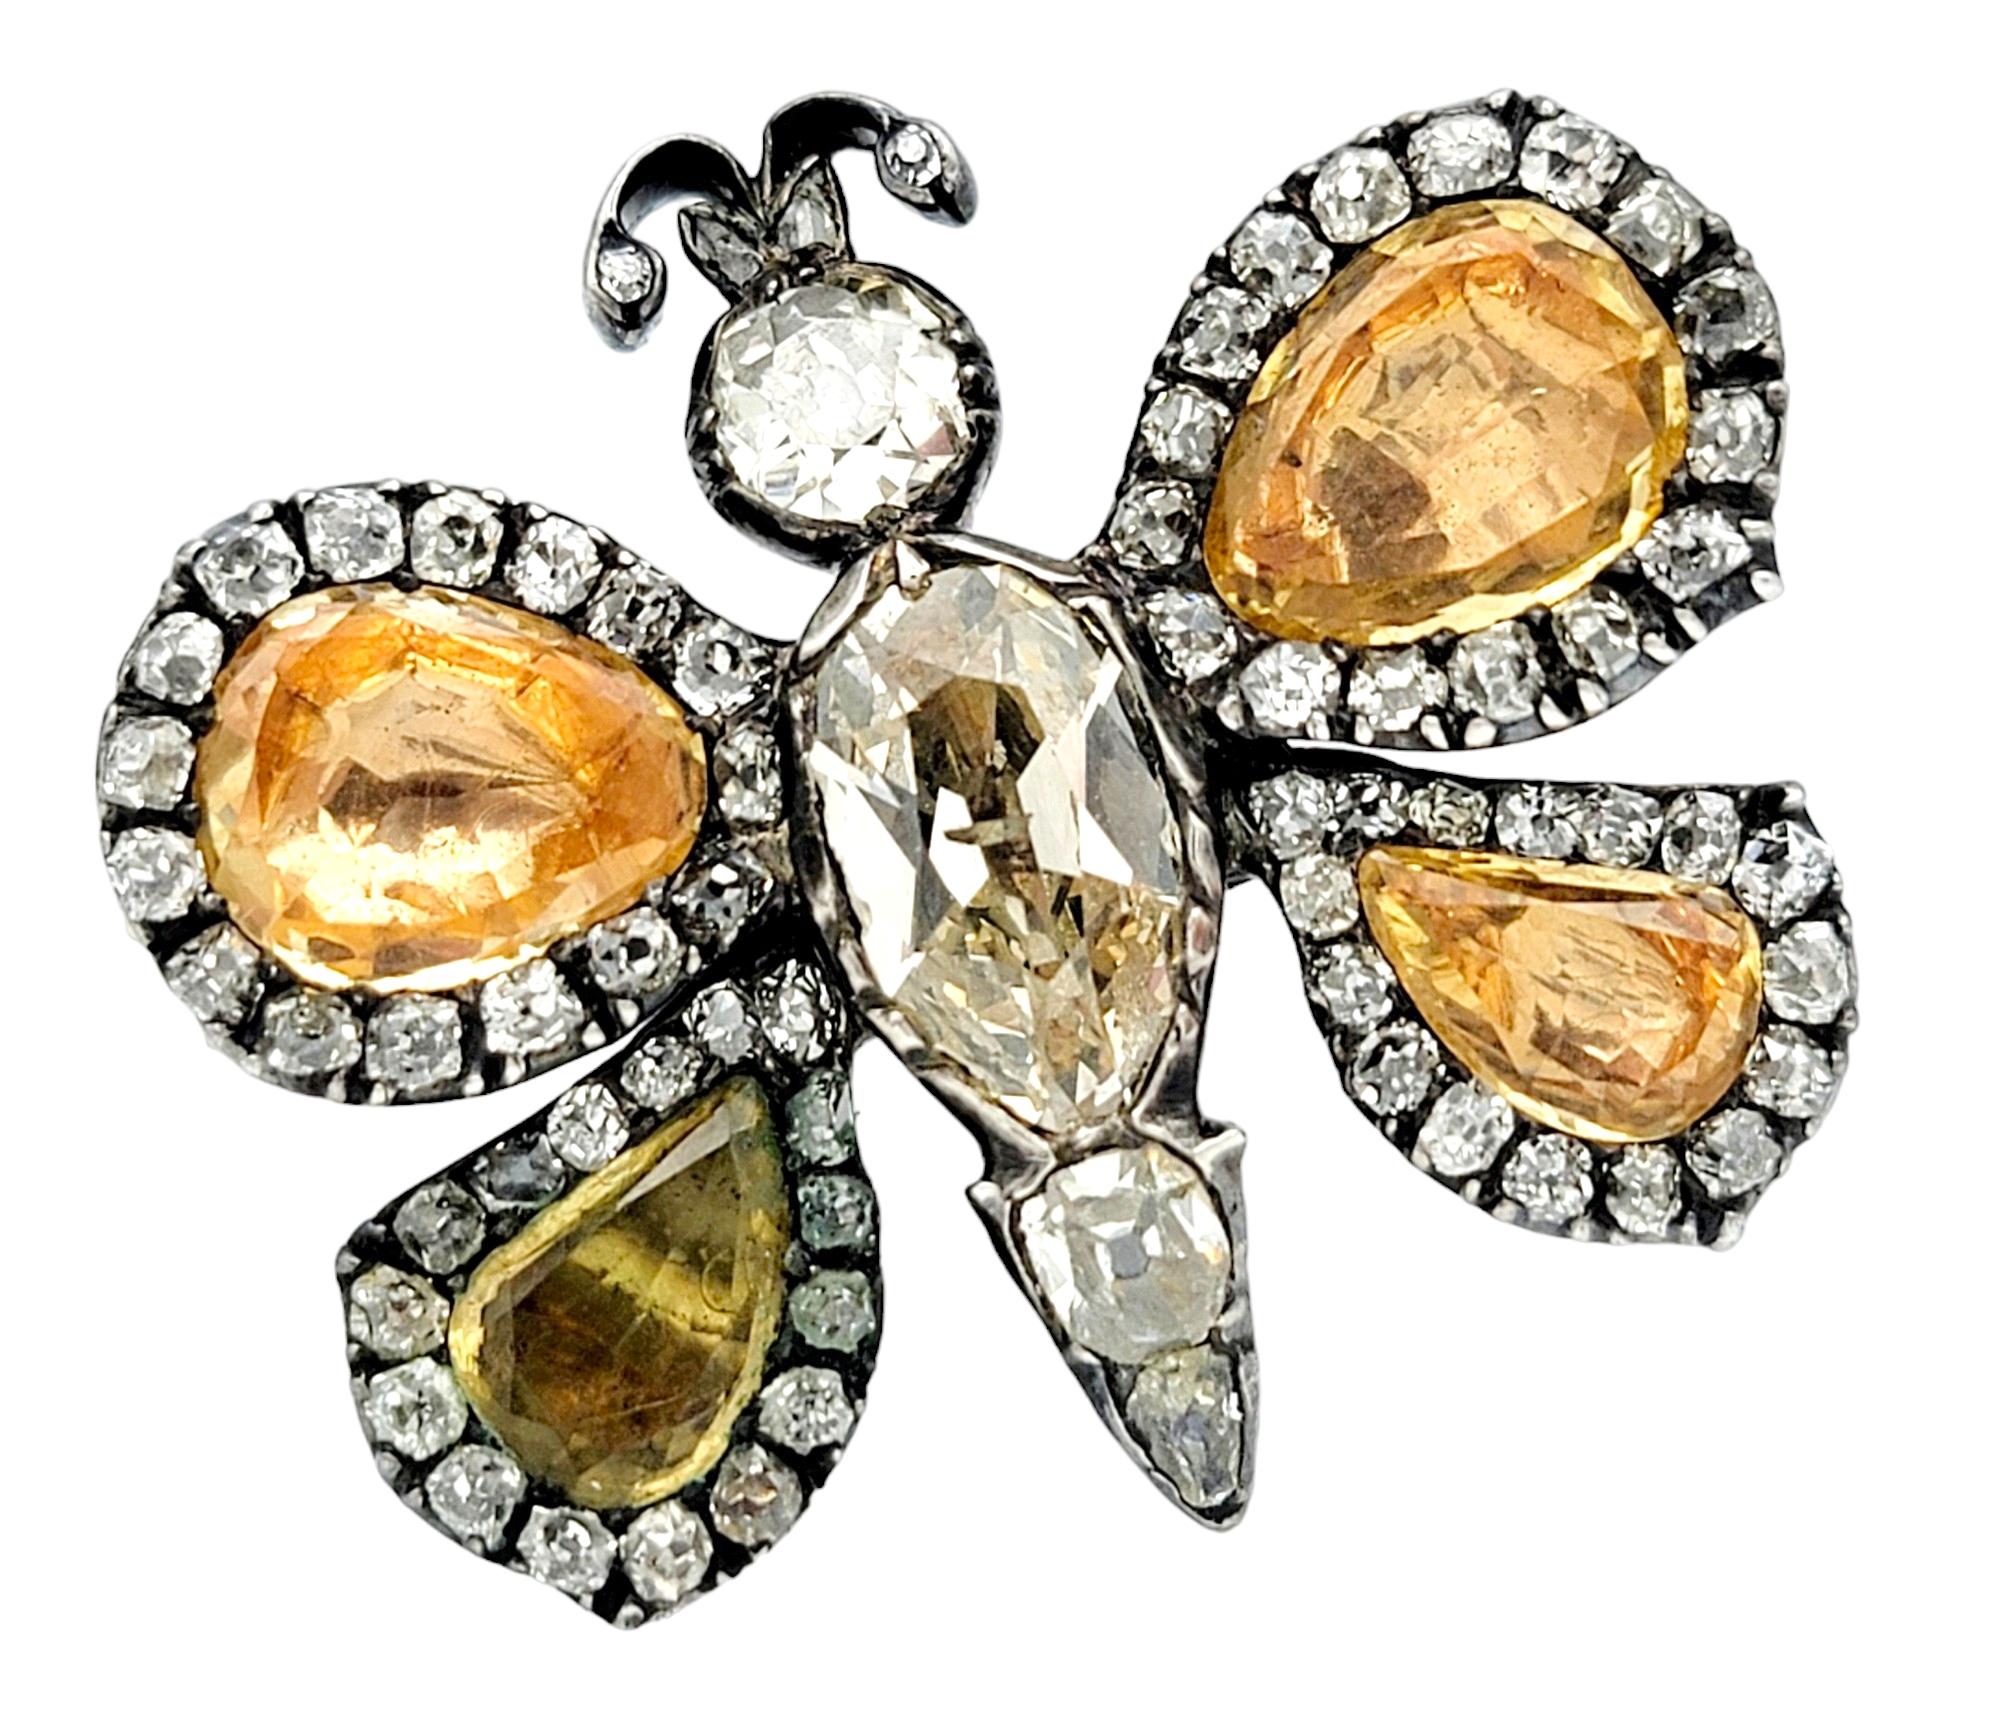 This exquisite vintage butterfly brooch is a stunning testament to elegance and sophistication, crafted in lustrous silver. The focal point of this enchanting piece is the vibrant pear-cut yellowish-orange hues of the topaz that graces the center of